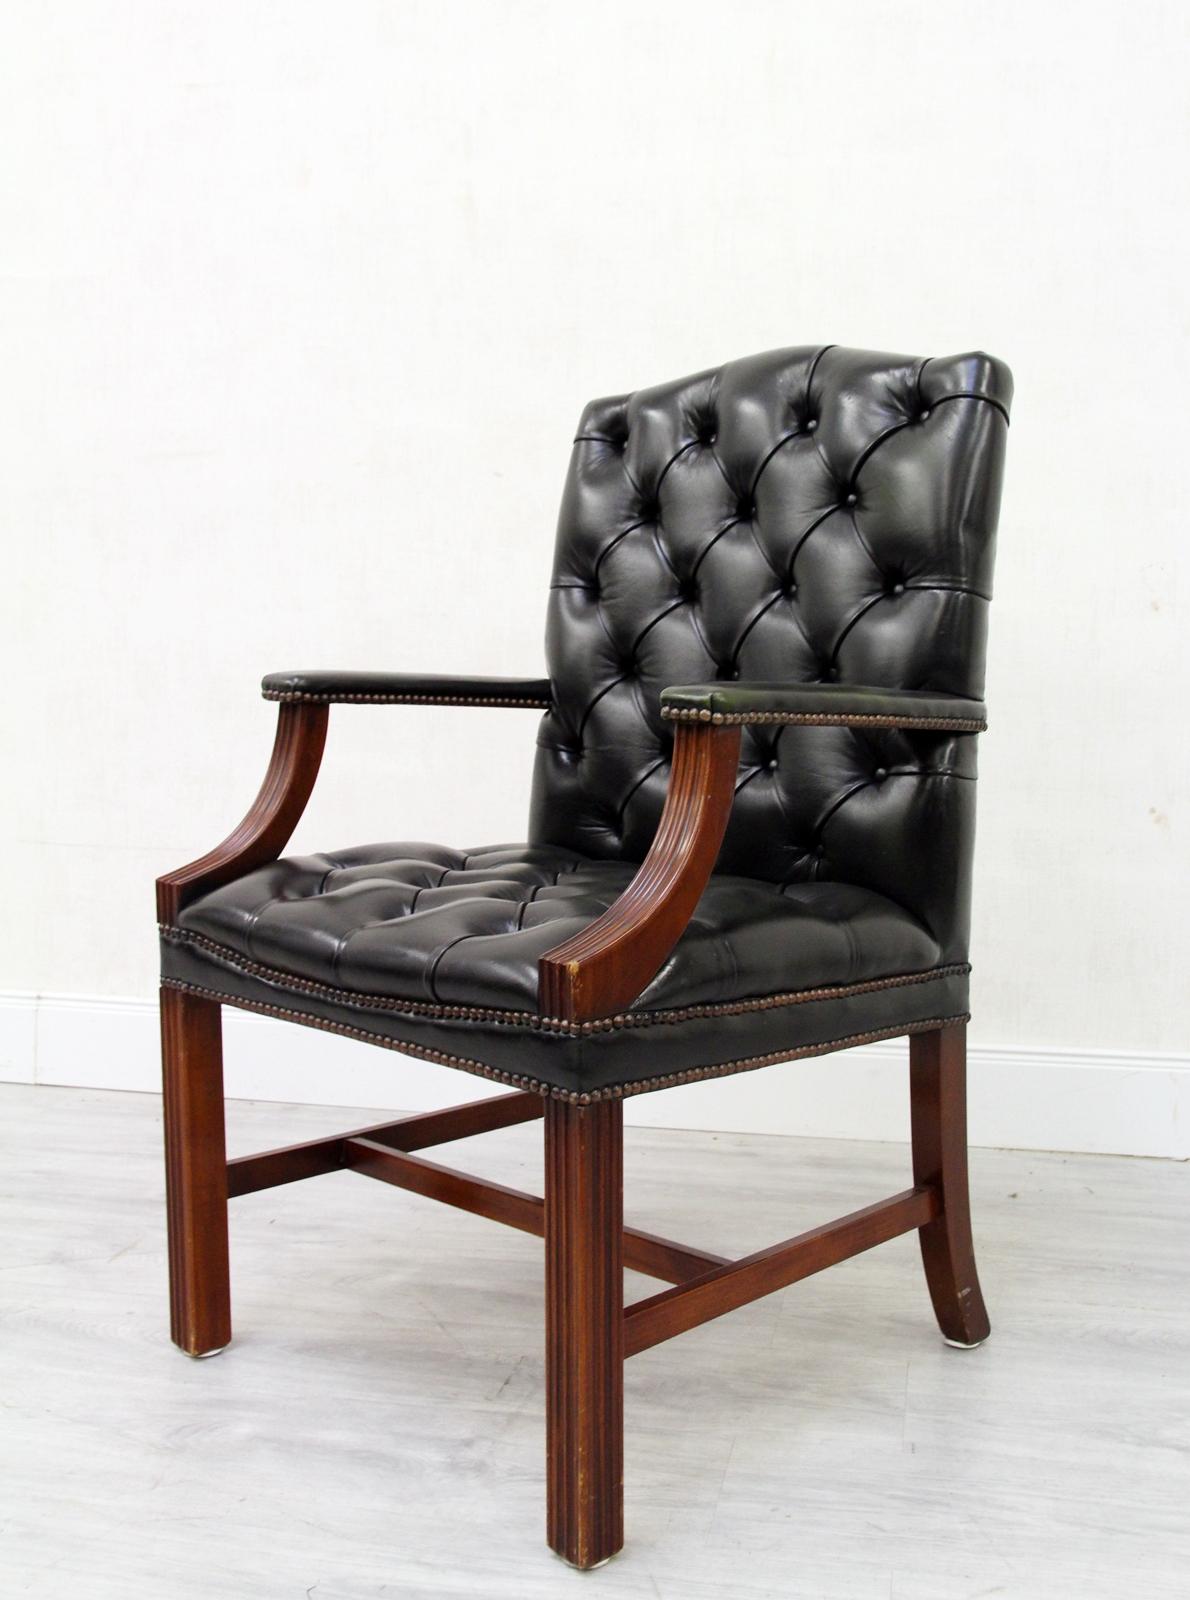 Late 20th Century Chesterfield Office Chair Leather Armchair Antique English Armchair Chair For Sale